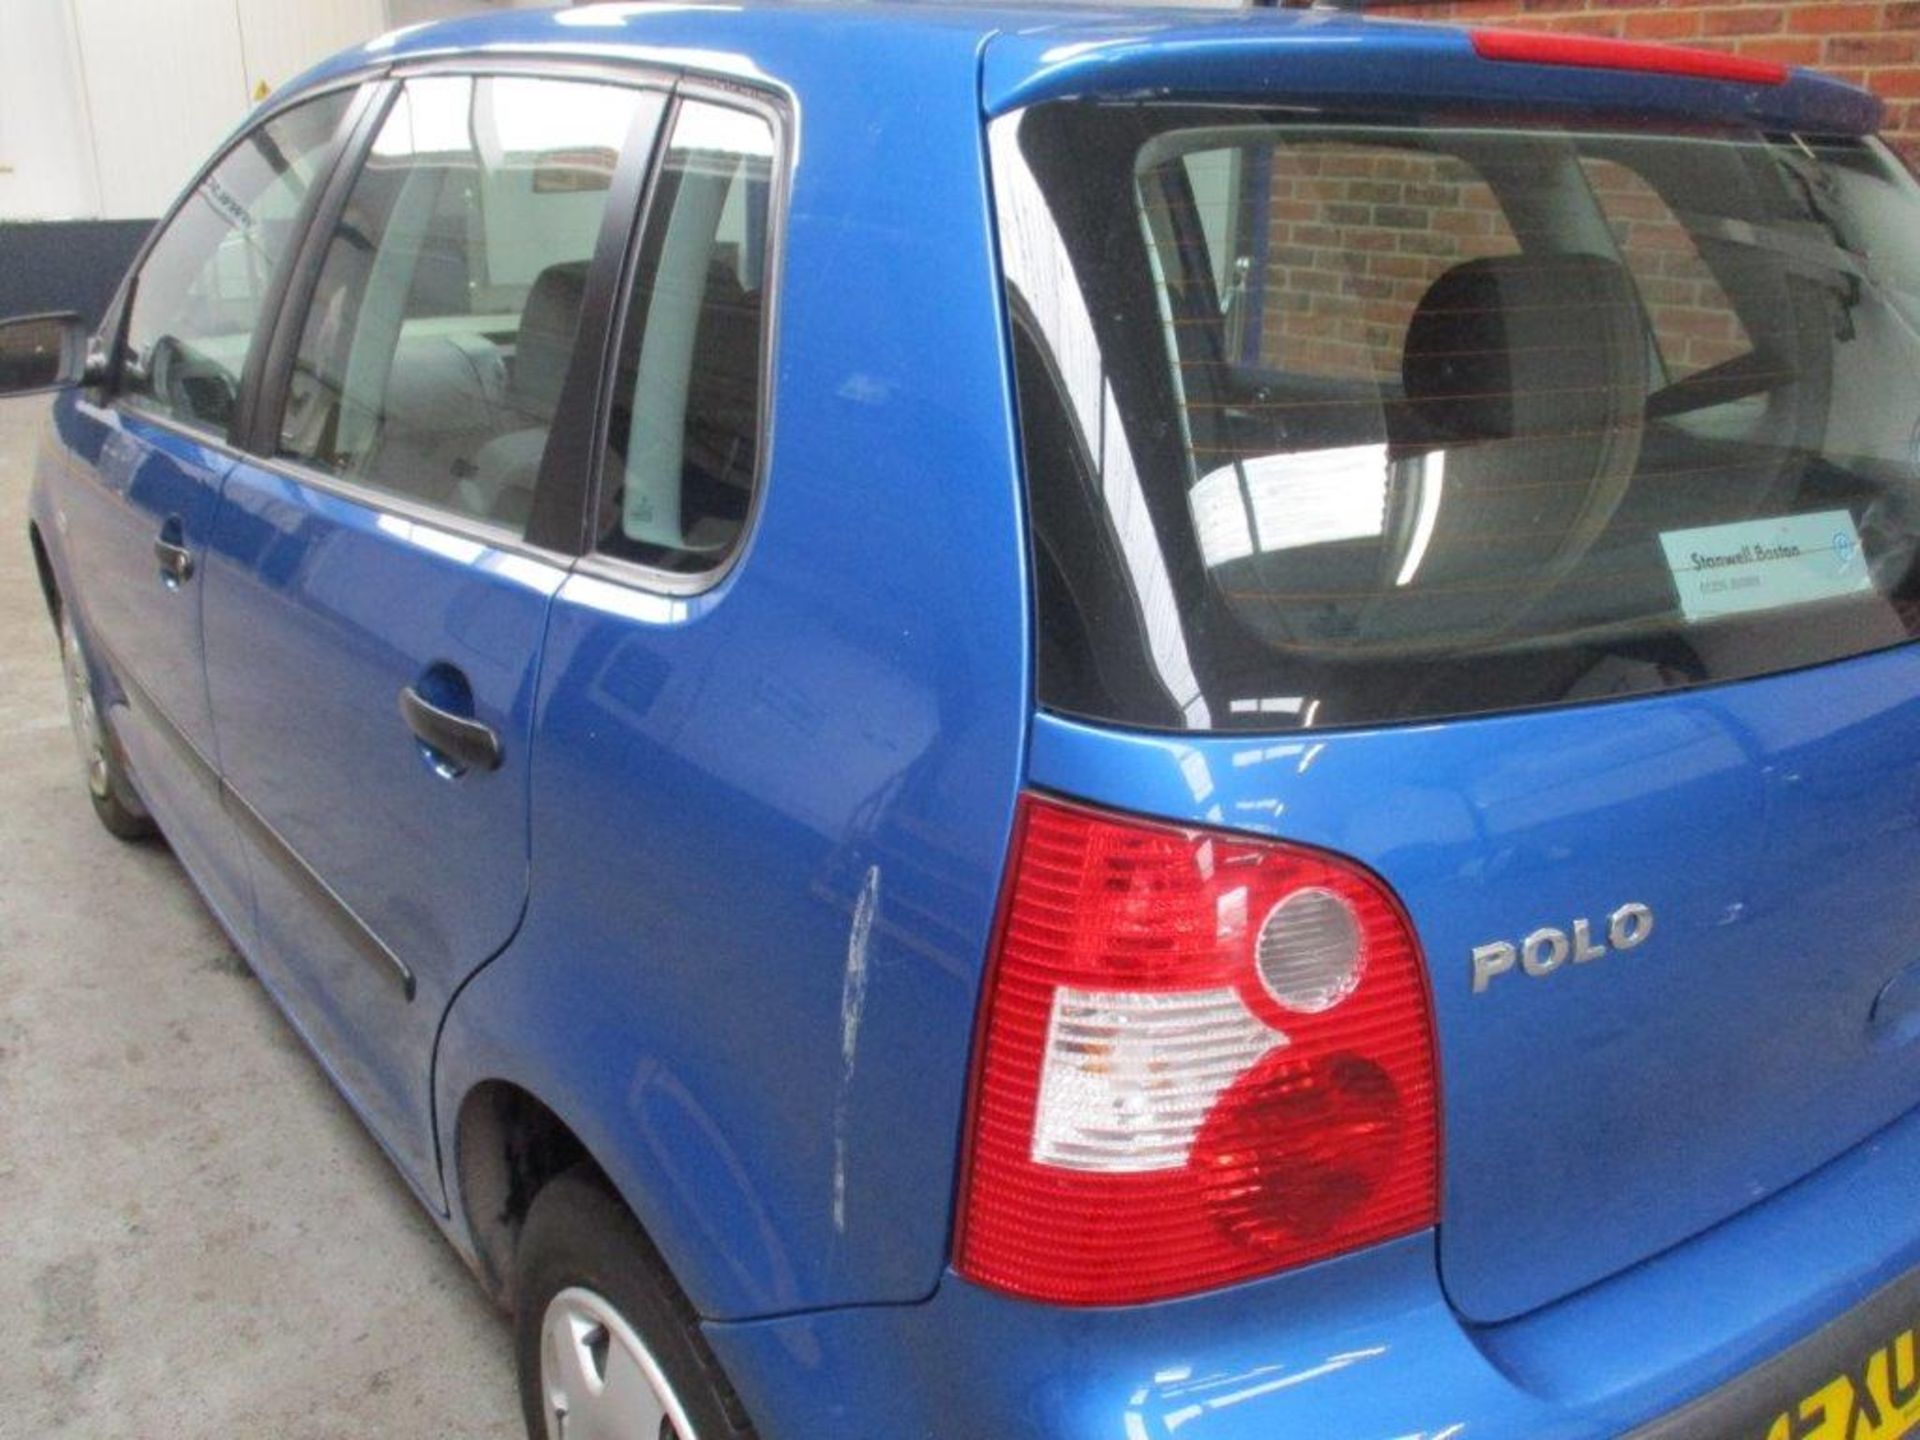 03 03 VW Polo S - Image 13 of 24